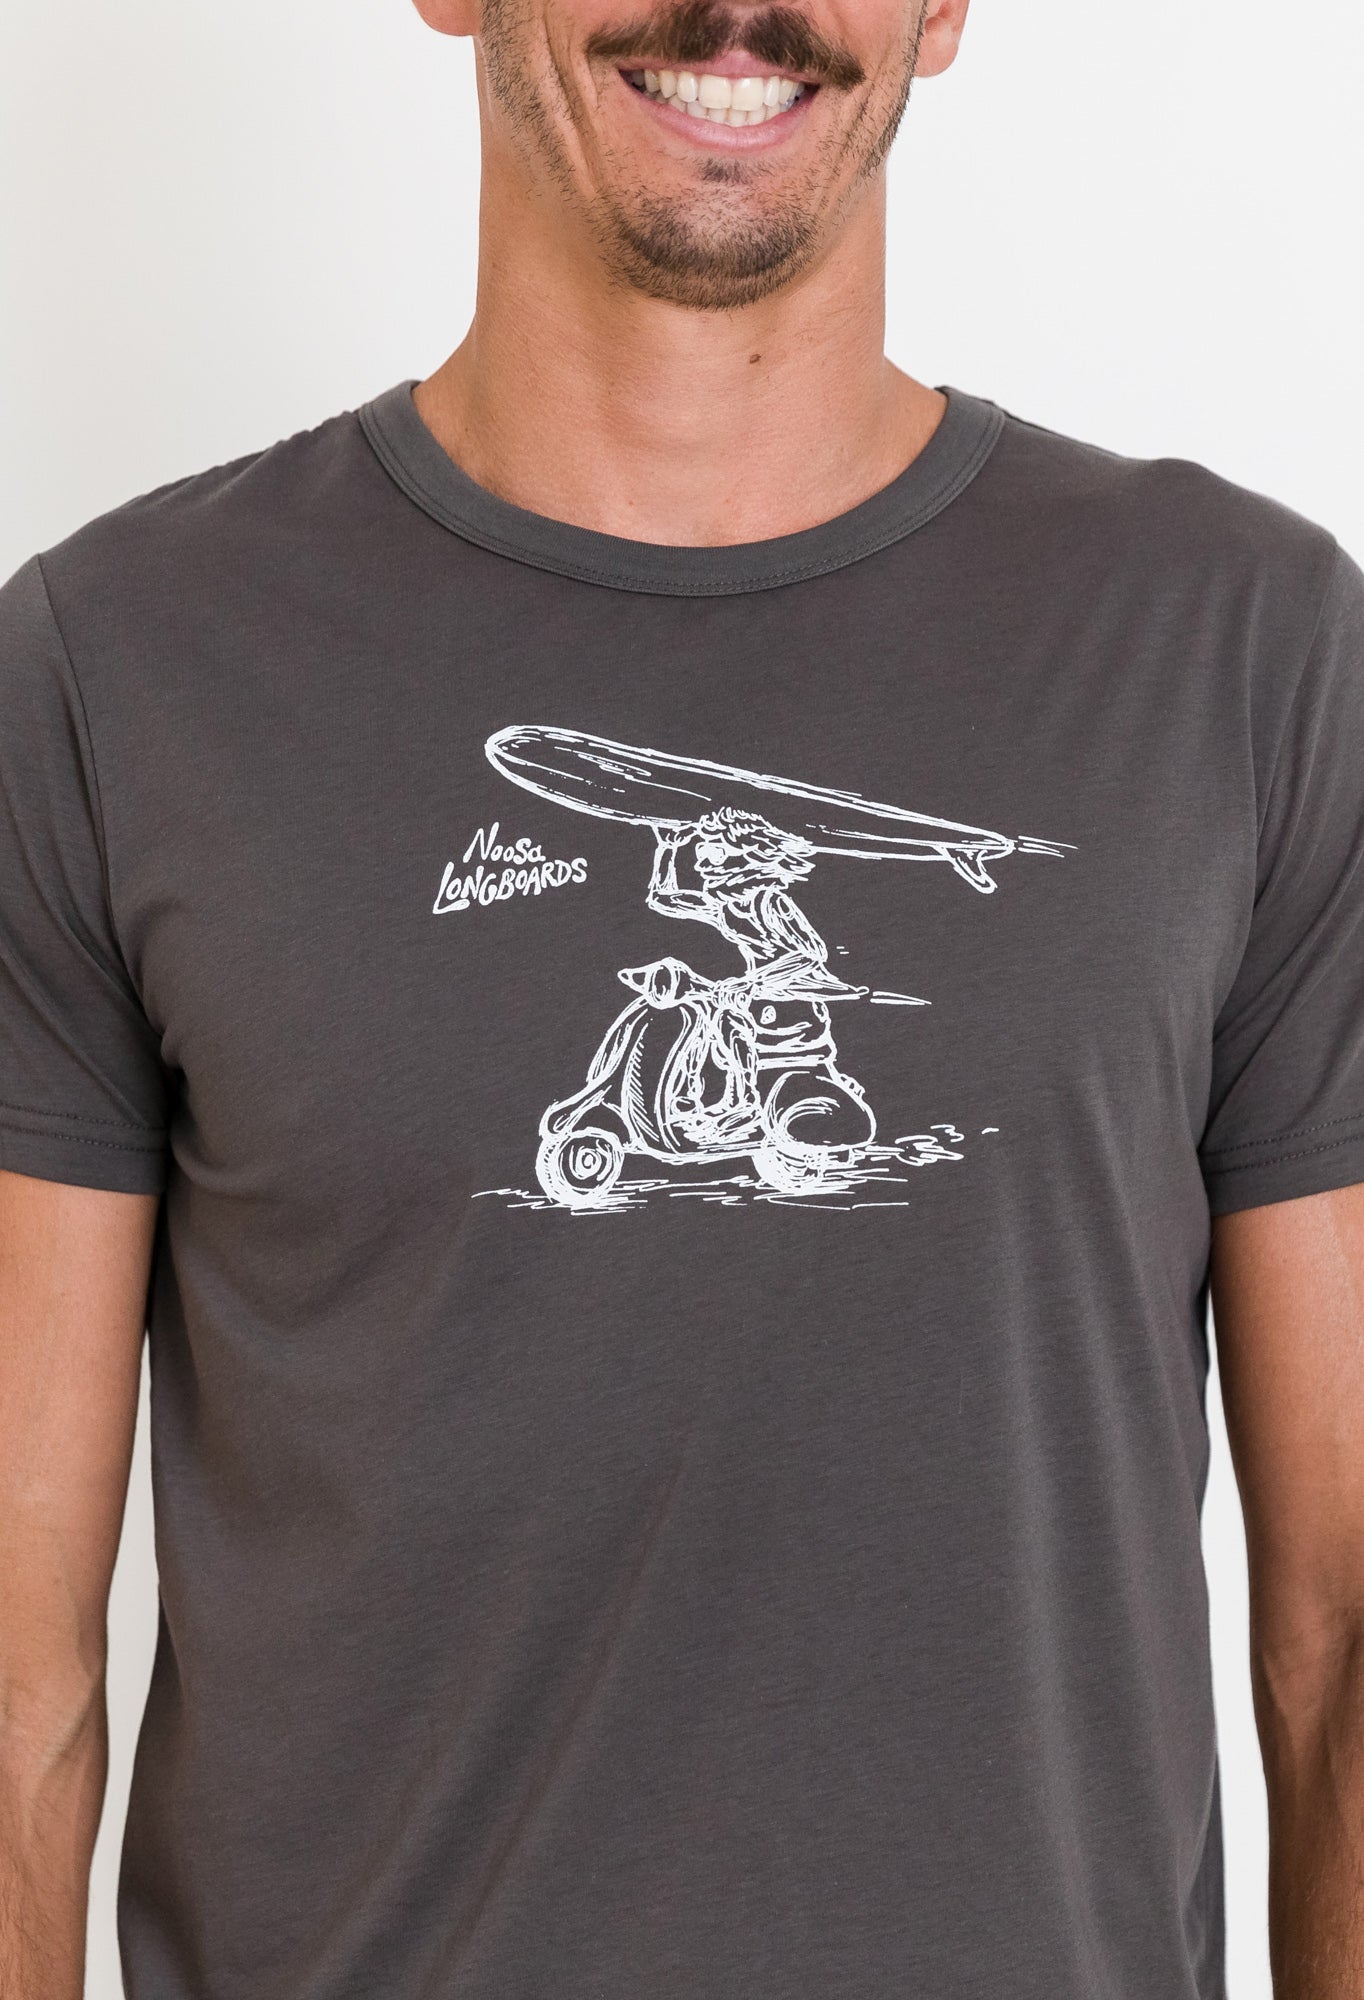 NL Art Series Scooter Tee Charcoal